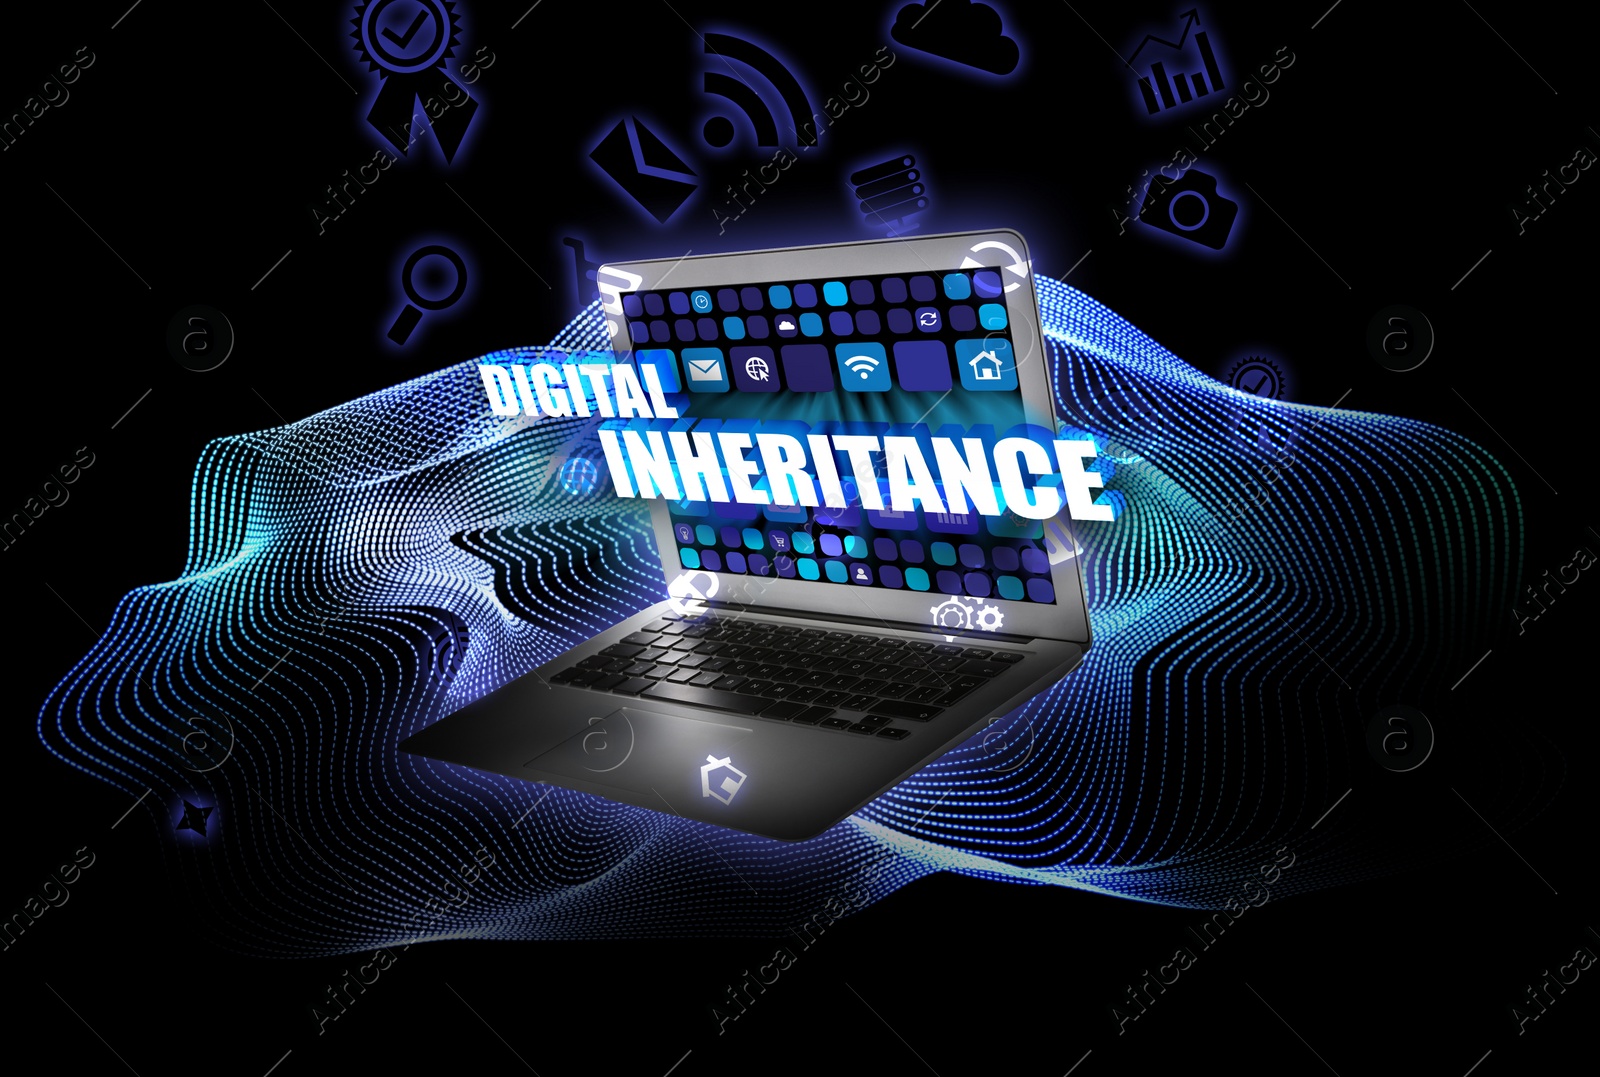 Image of Digital inheritance concept. laptop and many different icons on black background